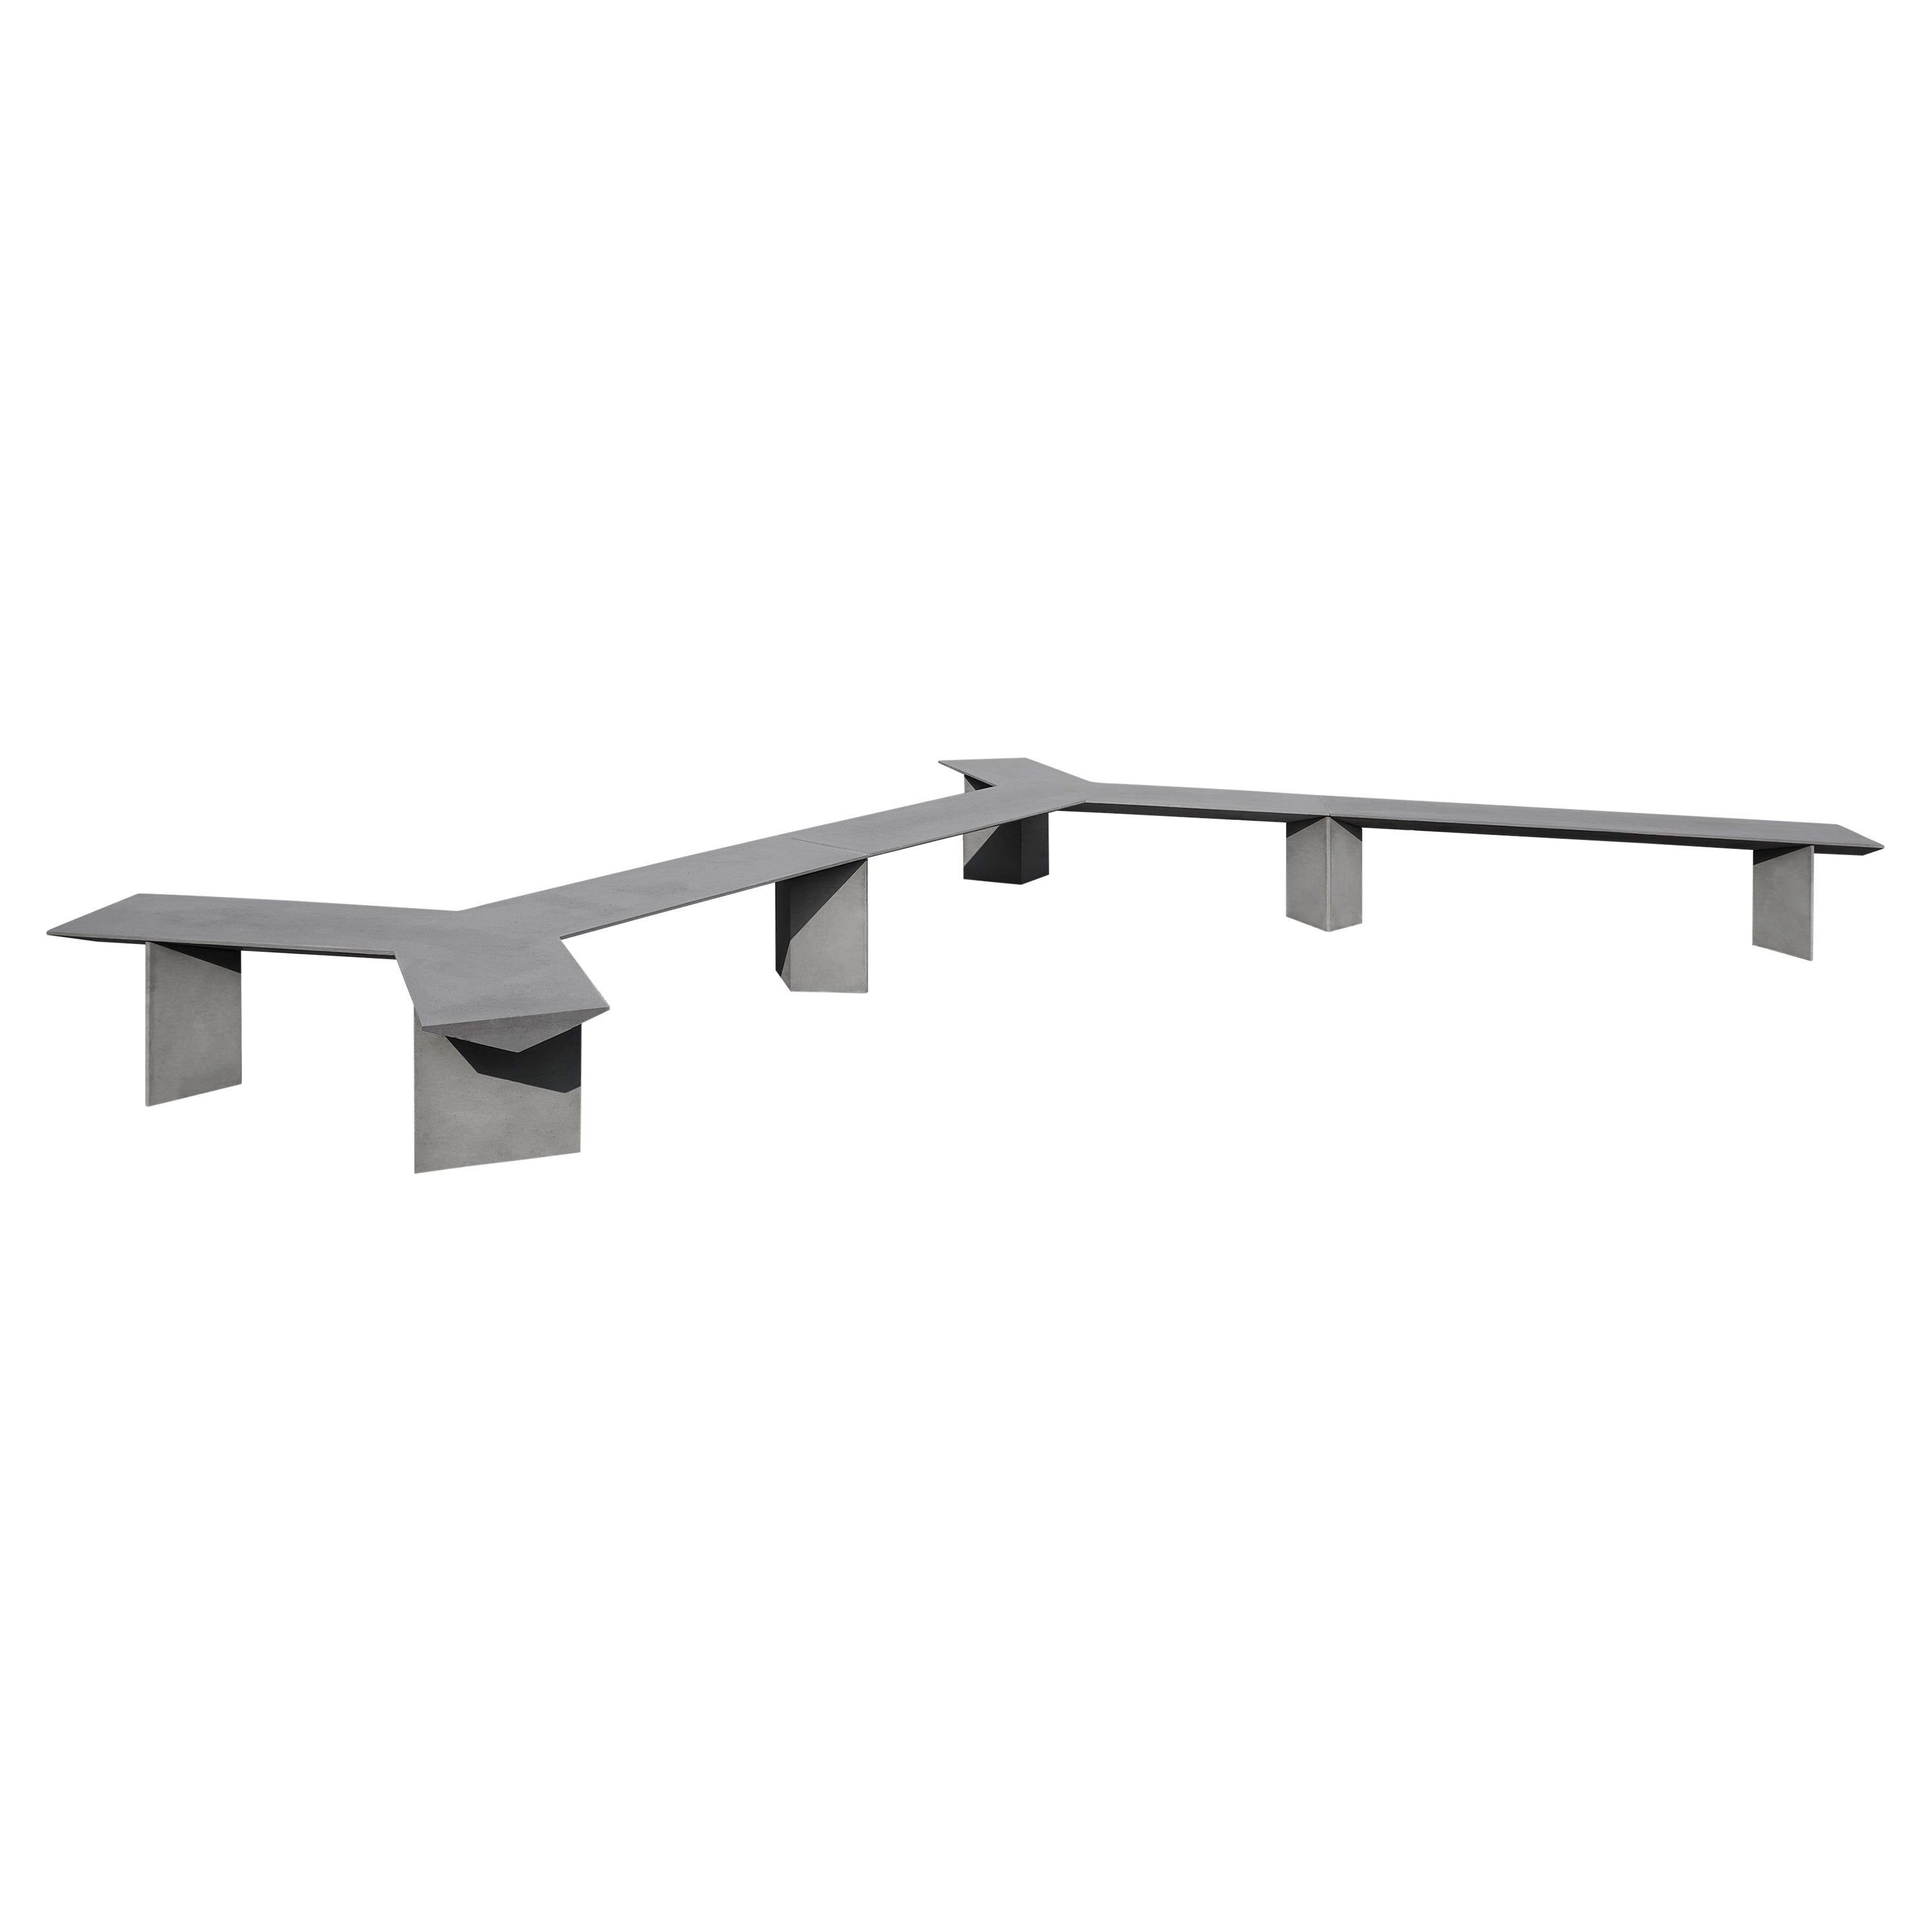 Modular Benches 'Liang' Made of Concrete, by Bentu Design For Sale